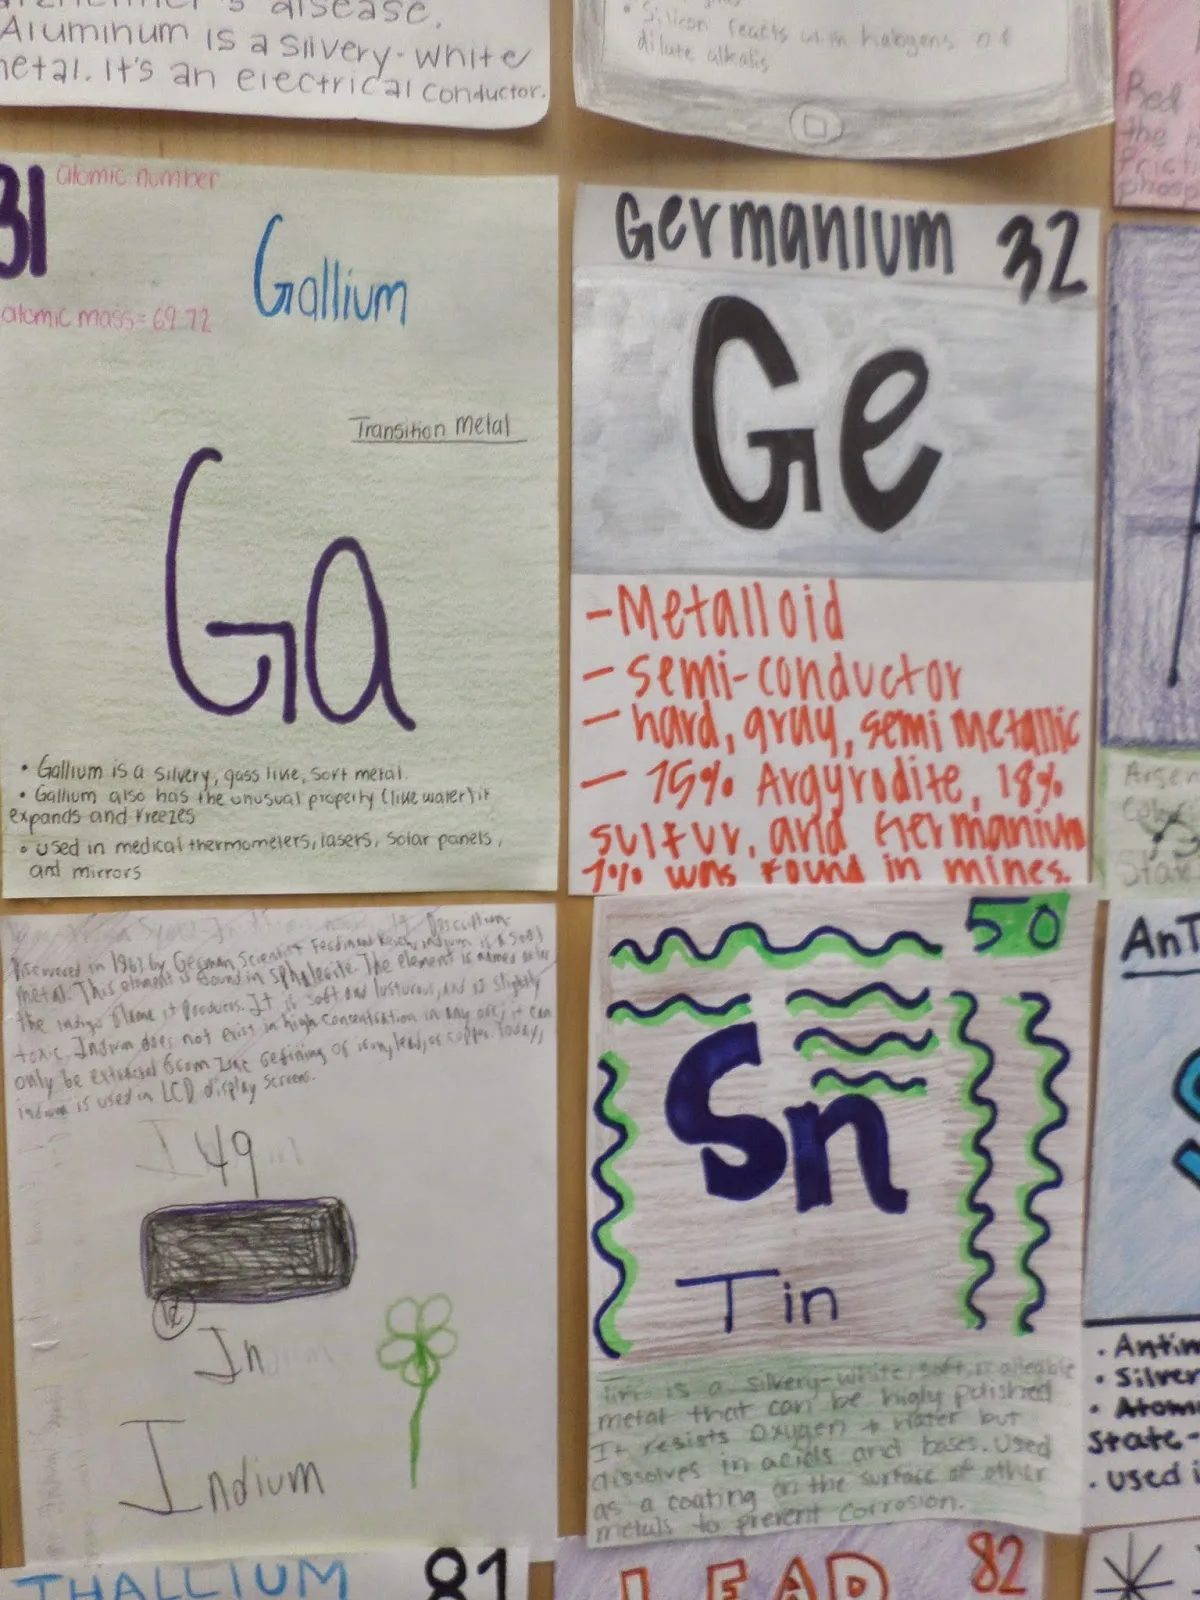 periodic table of the elements project